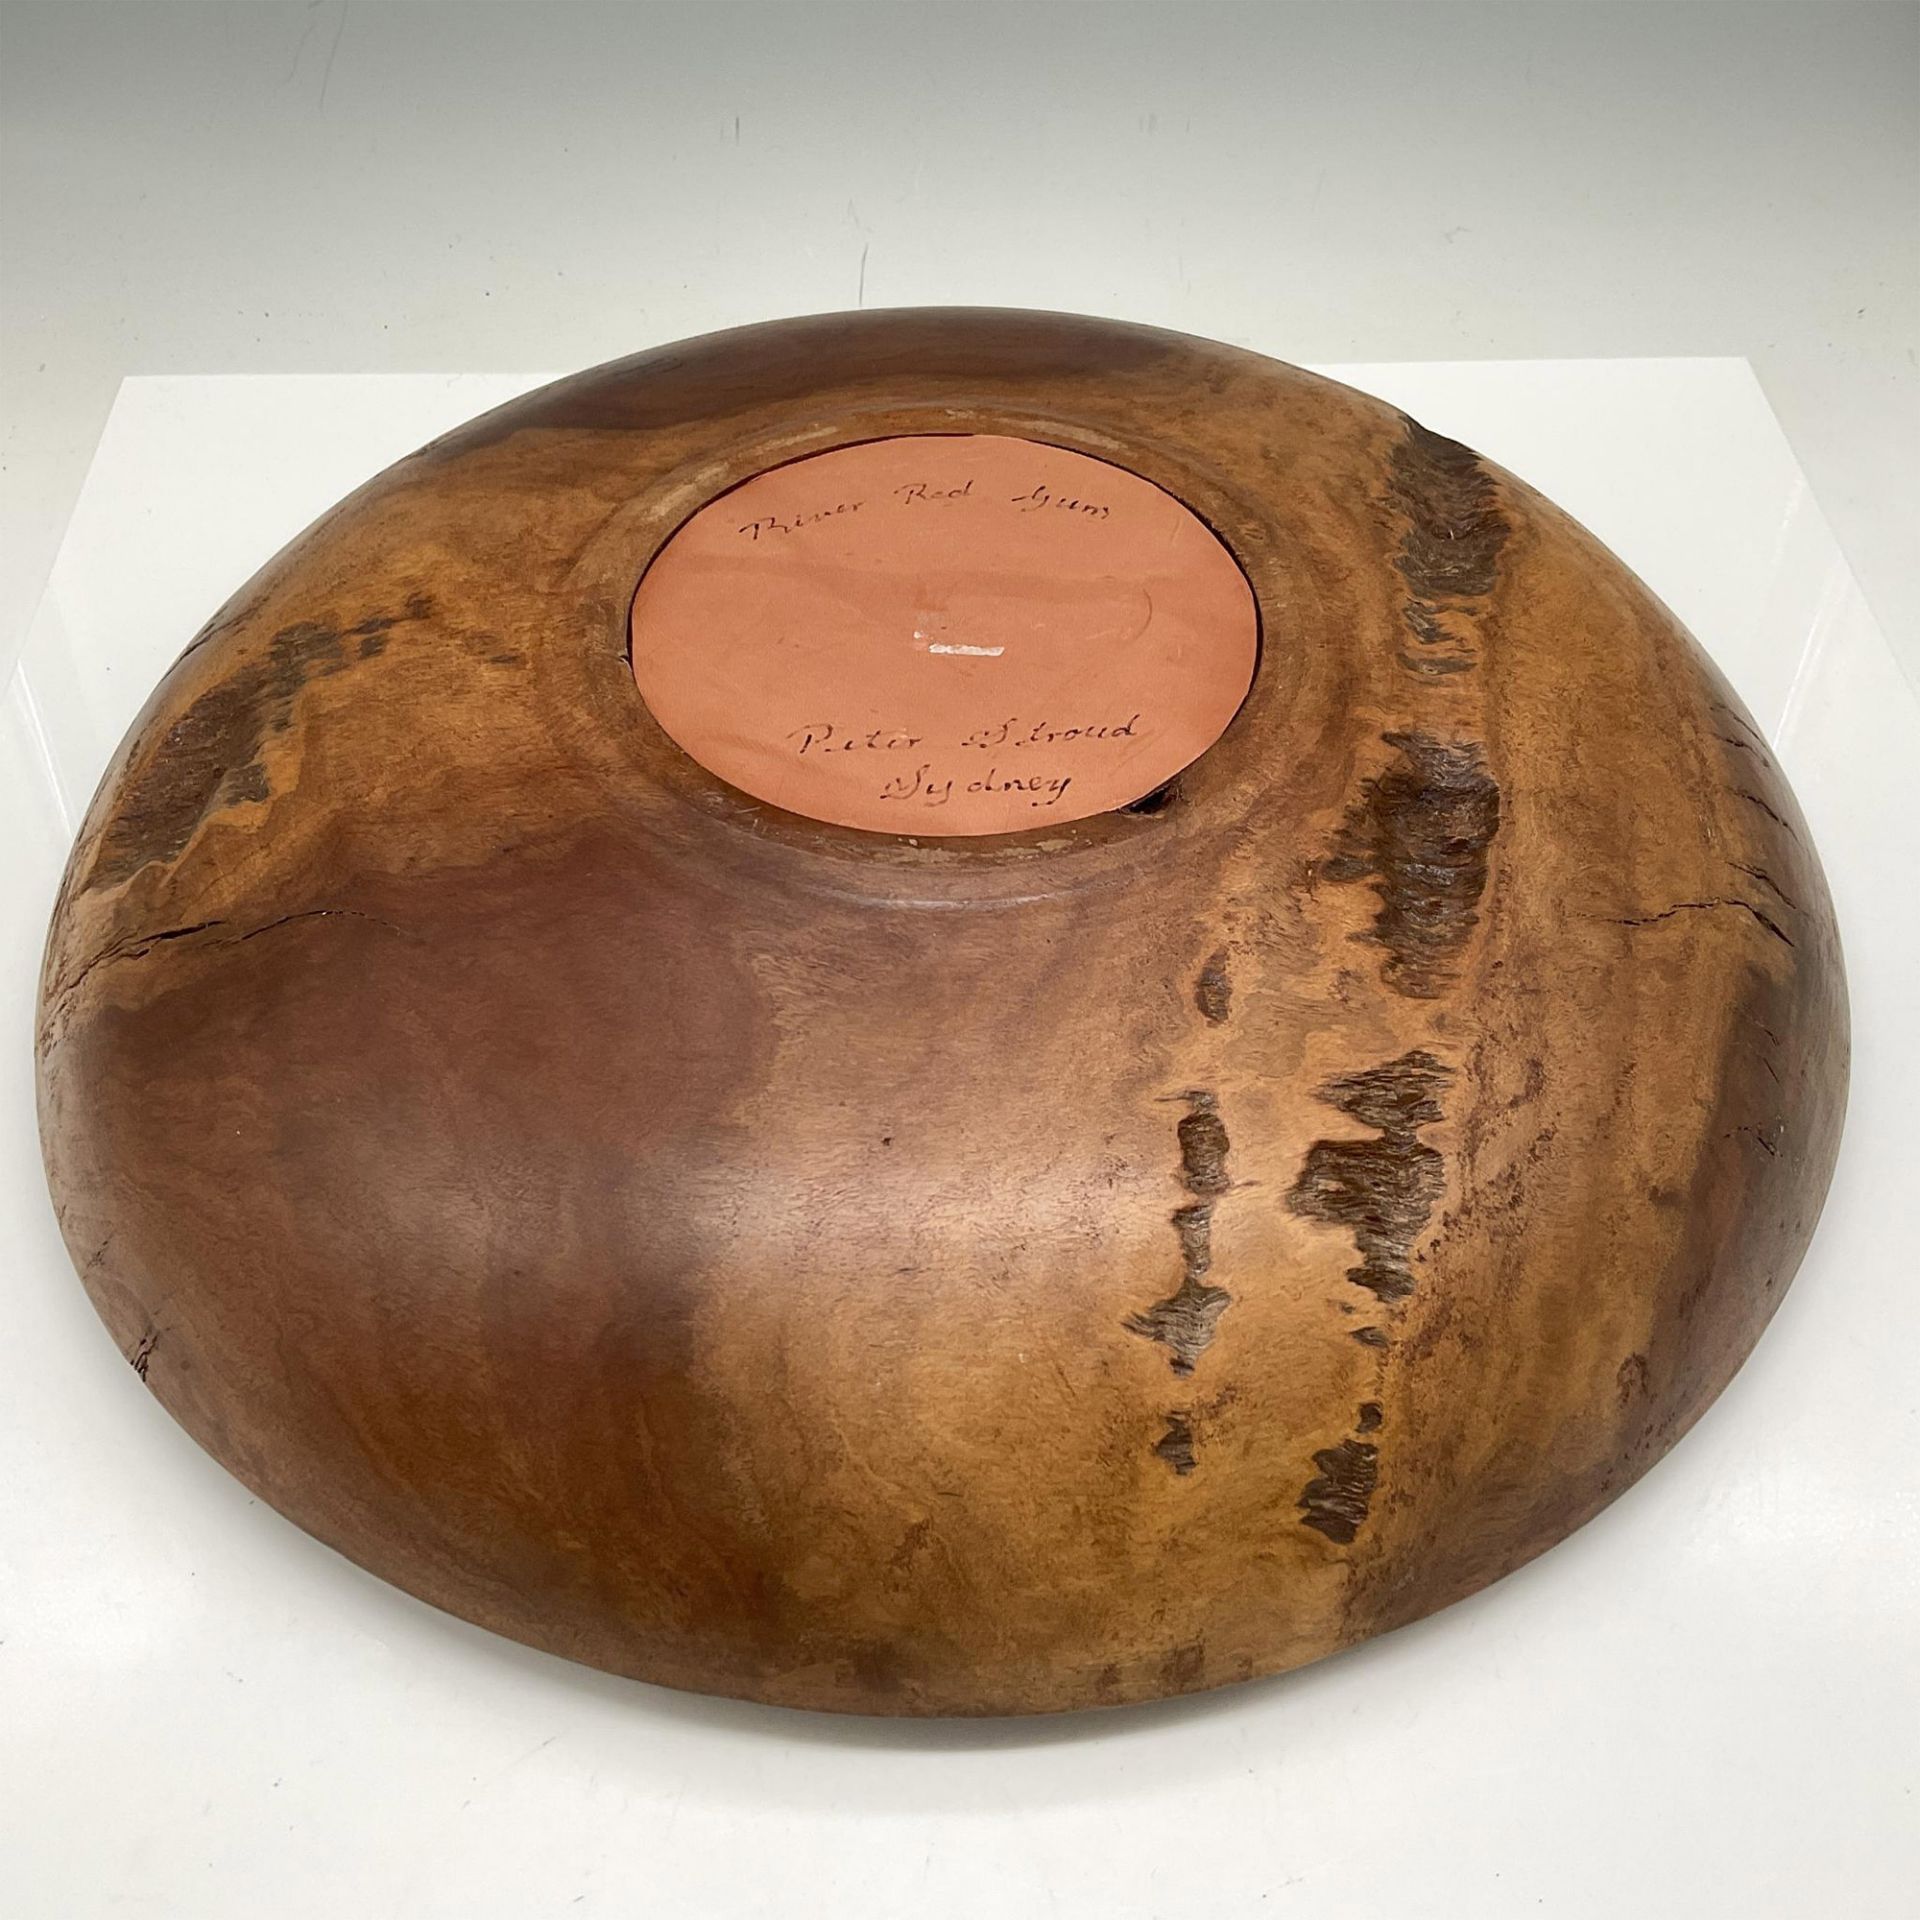 Peter Stroud Carved River Red Gum Wood Console Bowl - Image 3 of 3